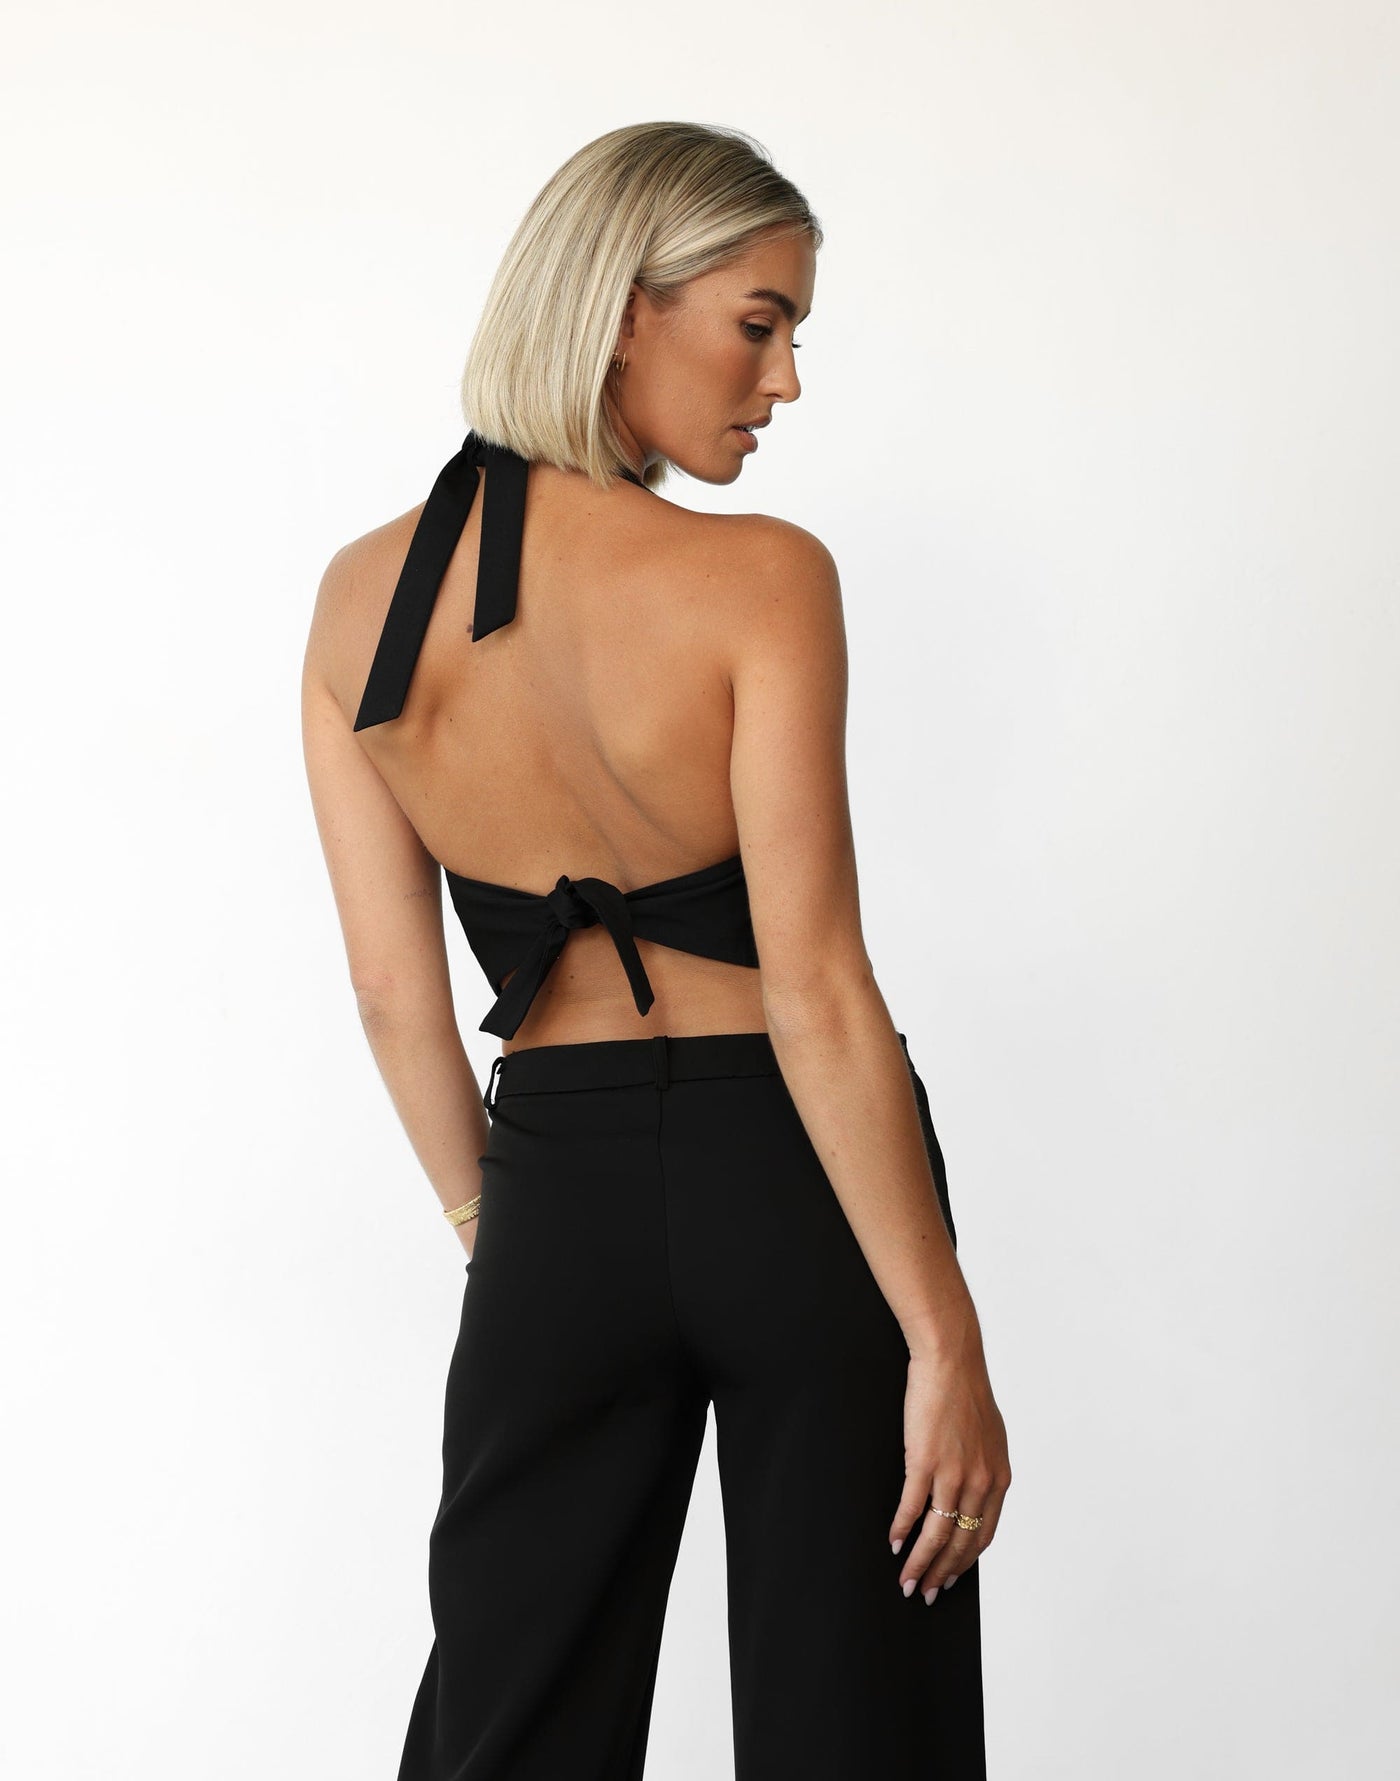 Kailani Top (Black) | Charcoal Clothing Exclusive - Open Front and Back Tie Up Neck Top - Women's Top - Charcoal Clothing